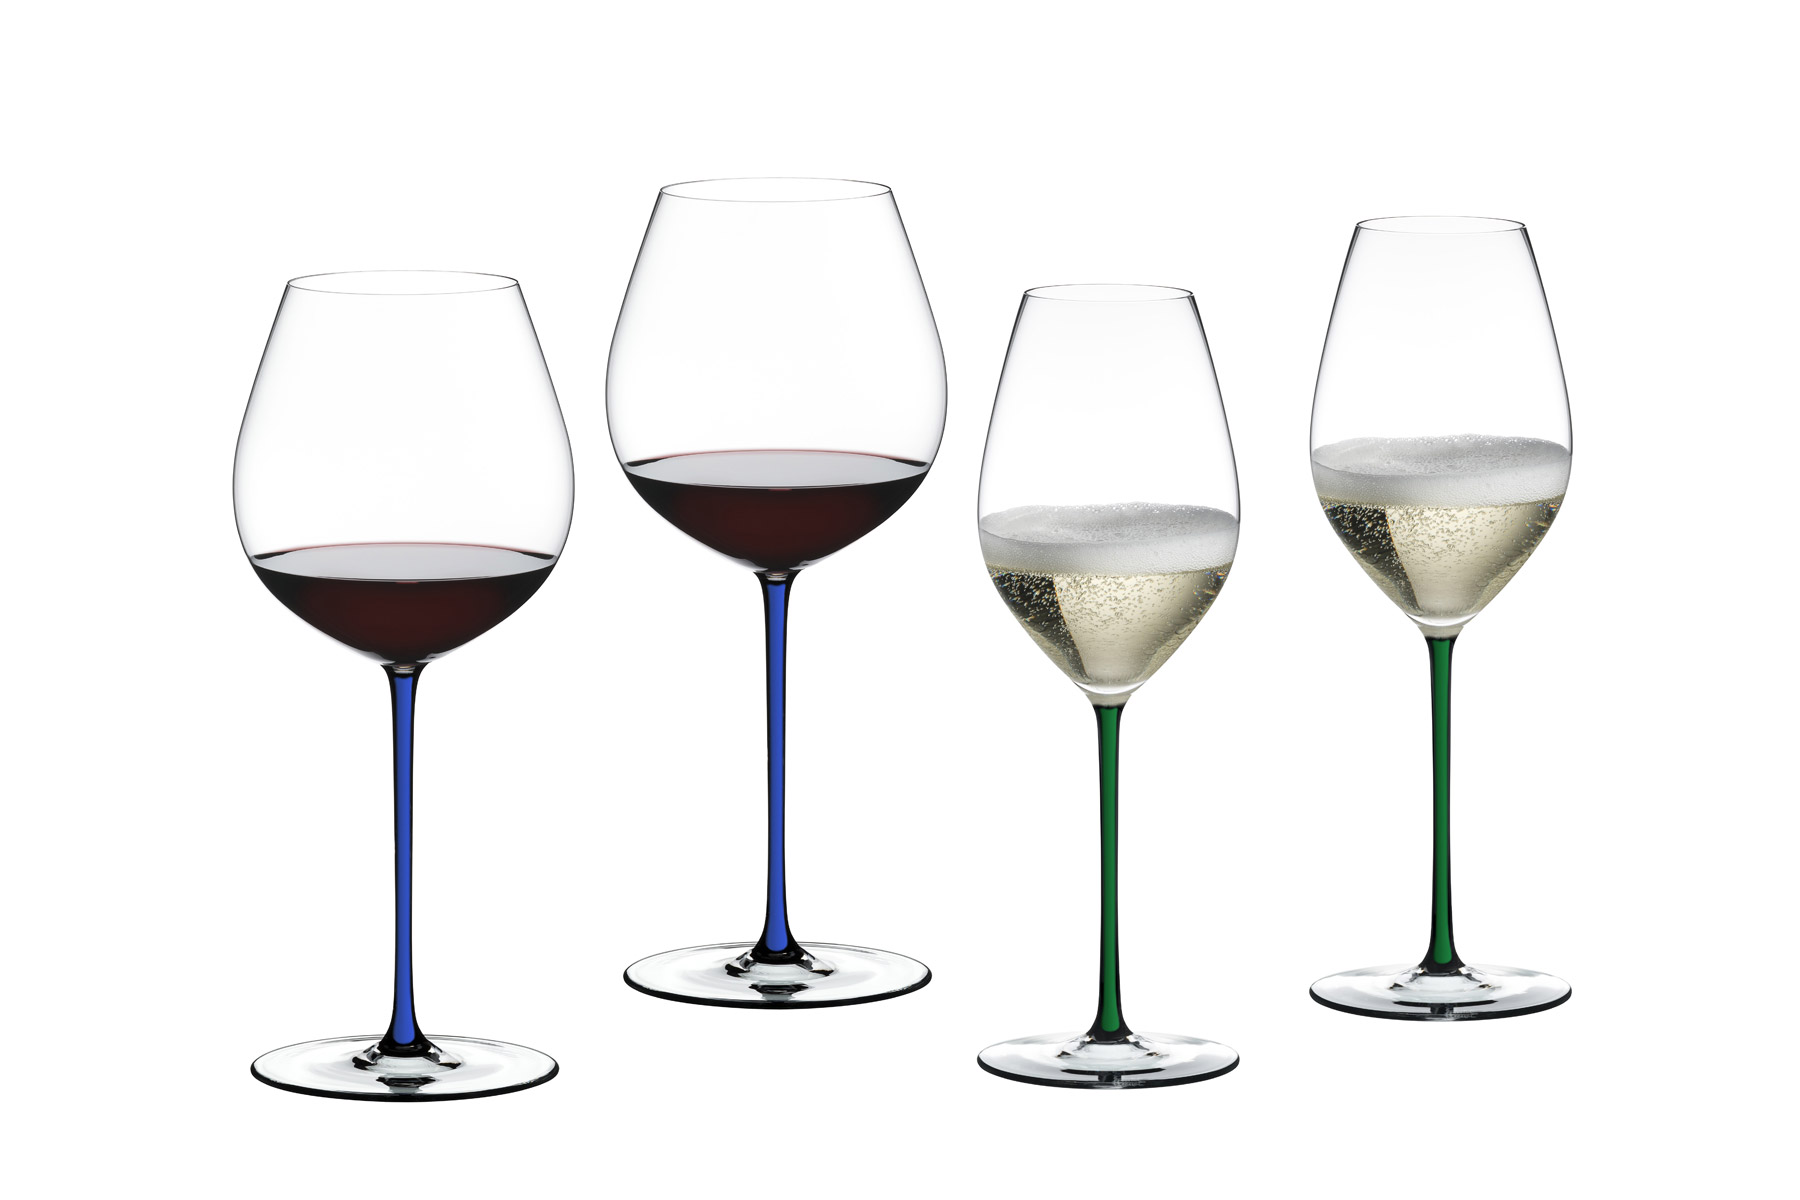 Win a set of Riedel wine glasses in our Valentine’s Day Instagram giveaway!